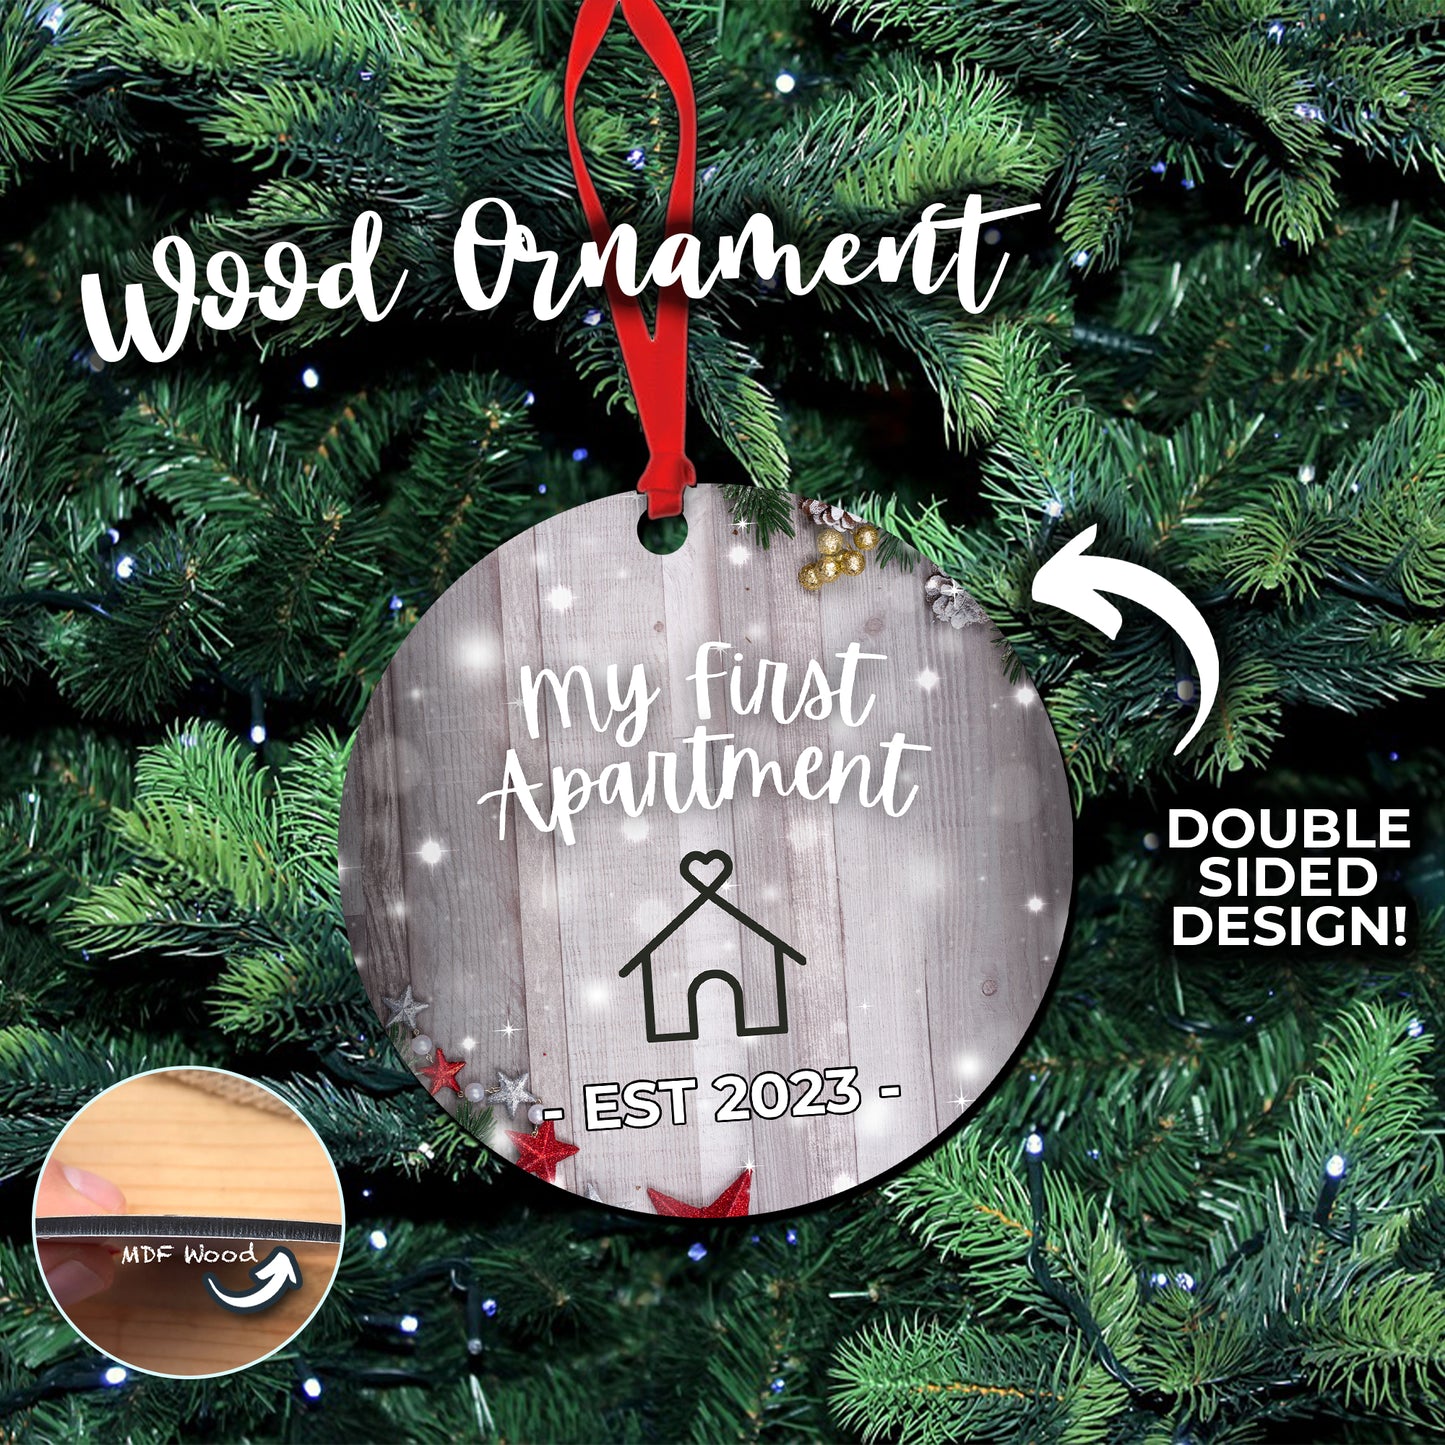 My First Apartment - Est 2023 - Double Sided Wooden Ornament